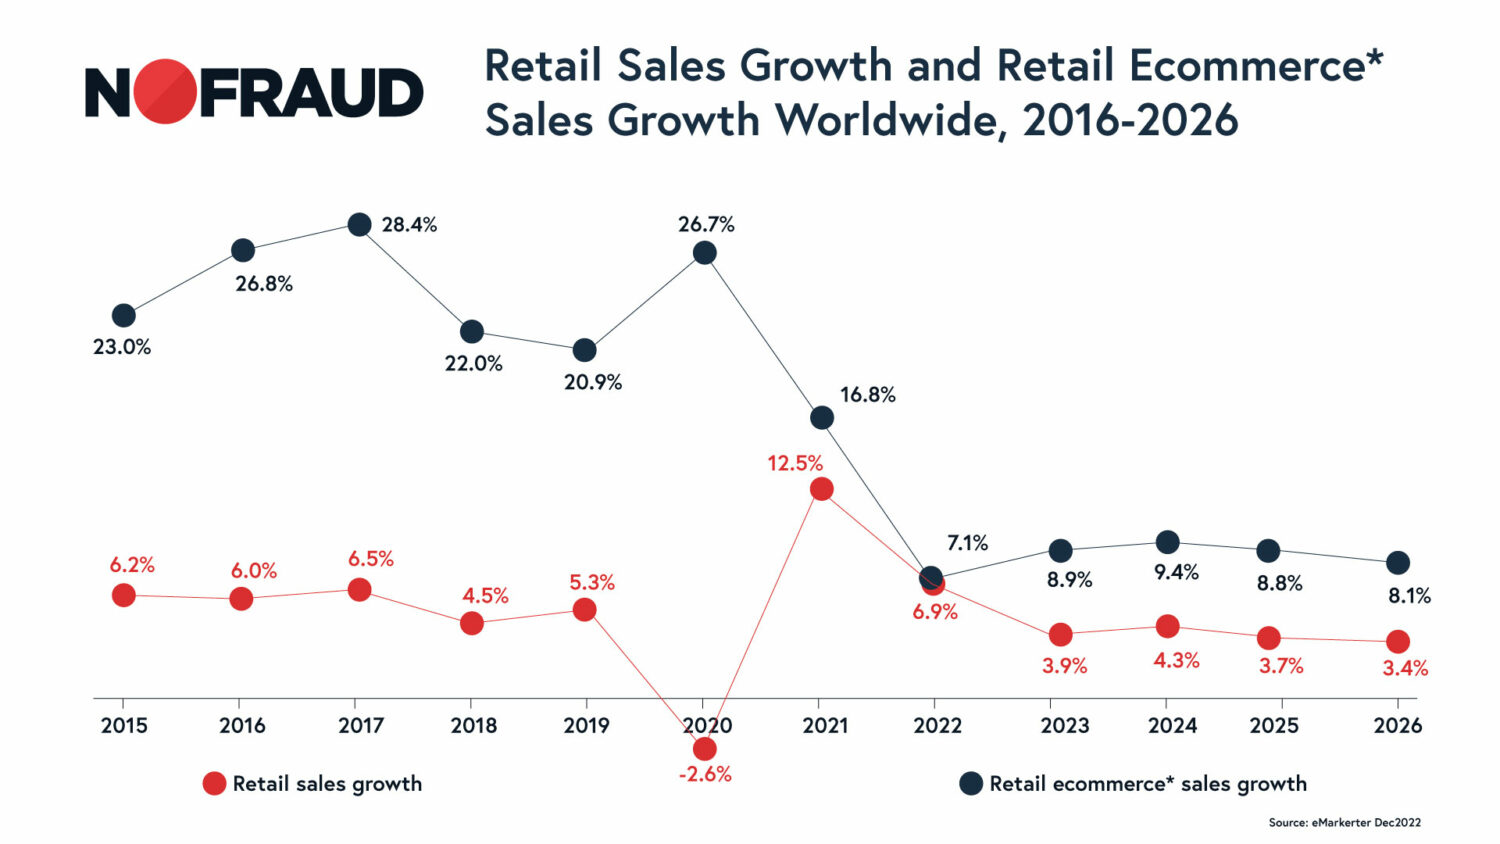 The gap between Retail Sales Growth and Retail eCommerce Sales Growth has narrowed.